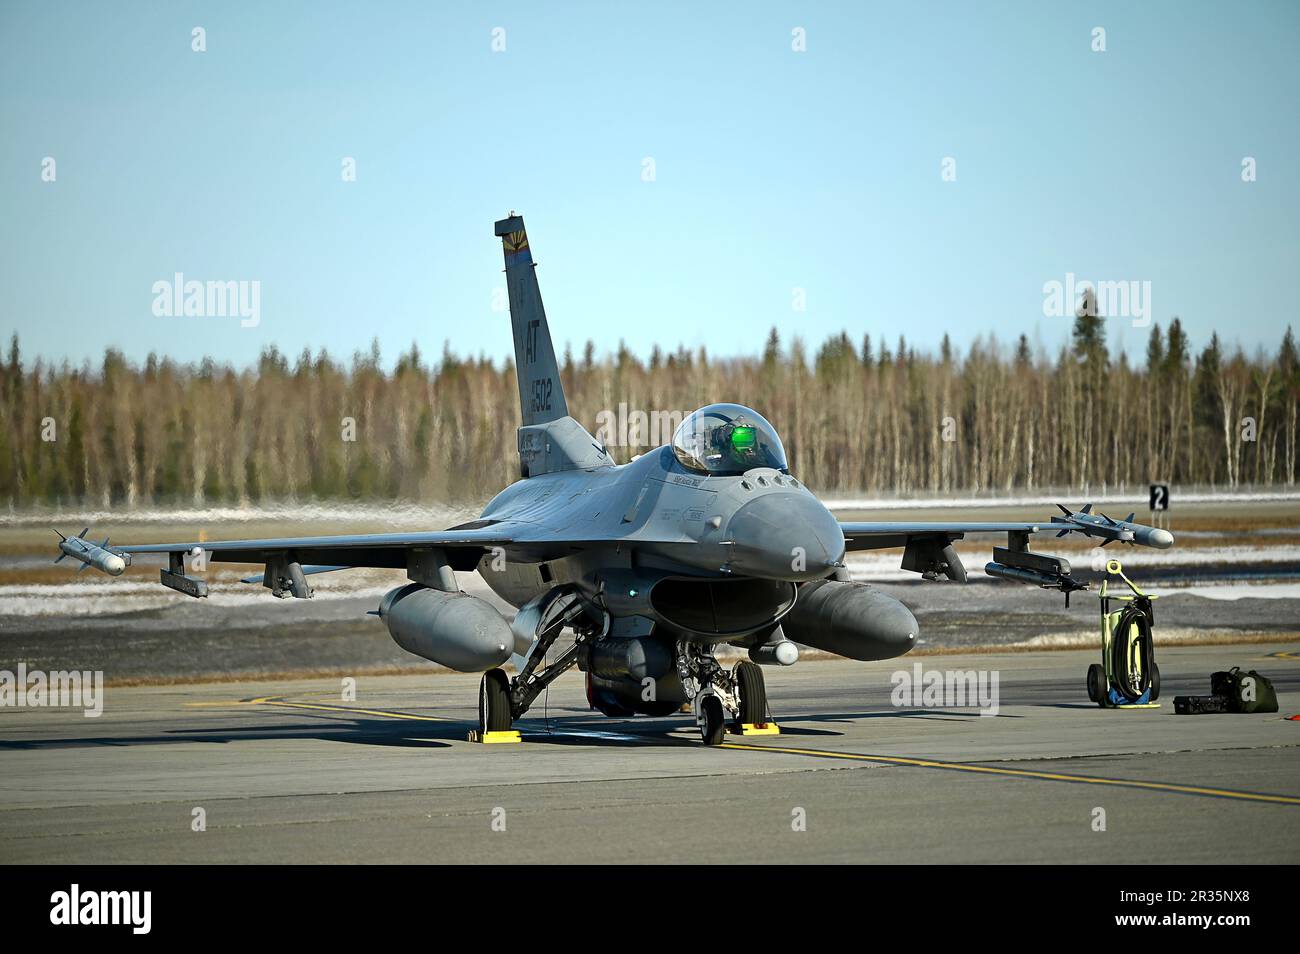 An F-16 Fighting Falcon, assigned to the Air National Guard Air Force Reserve Command Test Center, prepares to launch at Eielson Air Force Base, Alaska, May 5, 2023, during Northern Edge 2023. The exercise provided the opportunity for AATC personnel to test the “angry kitten” combat pod, an Electronic Warfare (EW) countermeasure system that can be housed in removable, adaptable pods under aircraft wings or fuselages. NE23 provides the opportunity to hone current and test future applications of combat operations and weapons capabilities. (U.S. Air National Guard photo by Master Sgt. Amber Monio Stock Photo